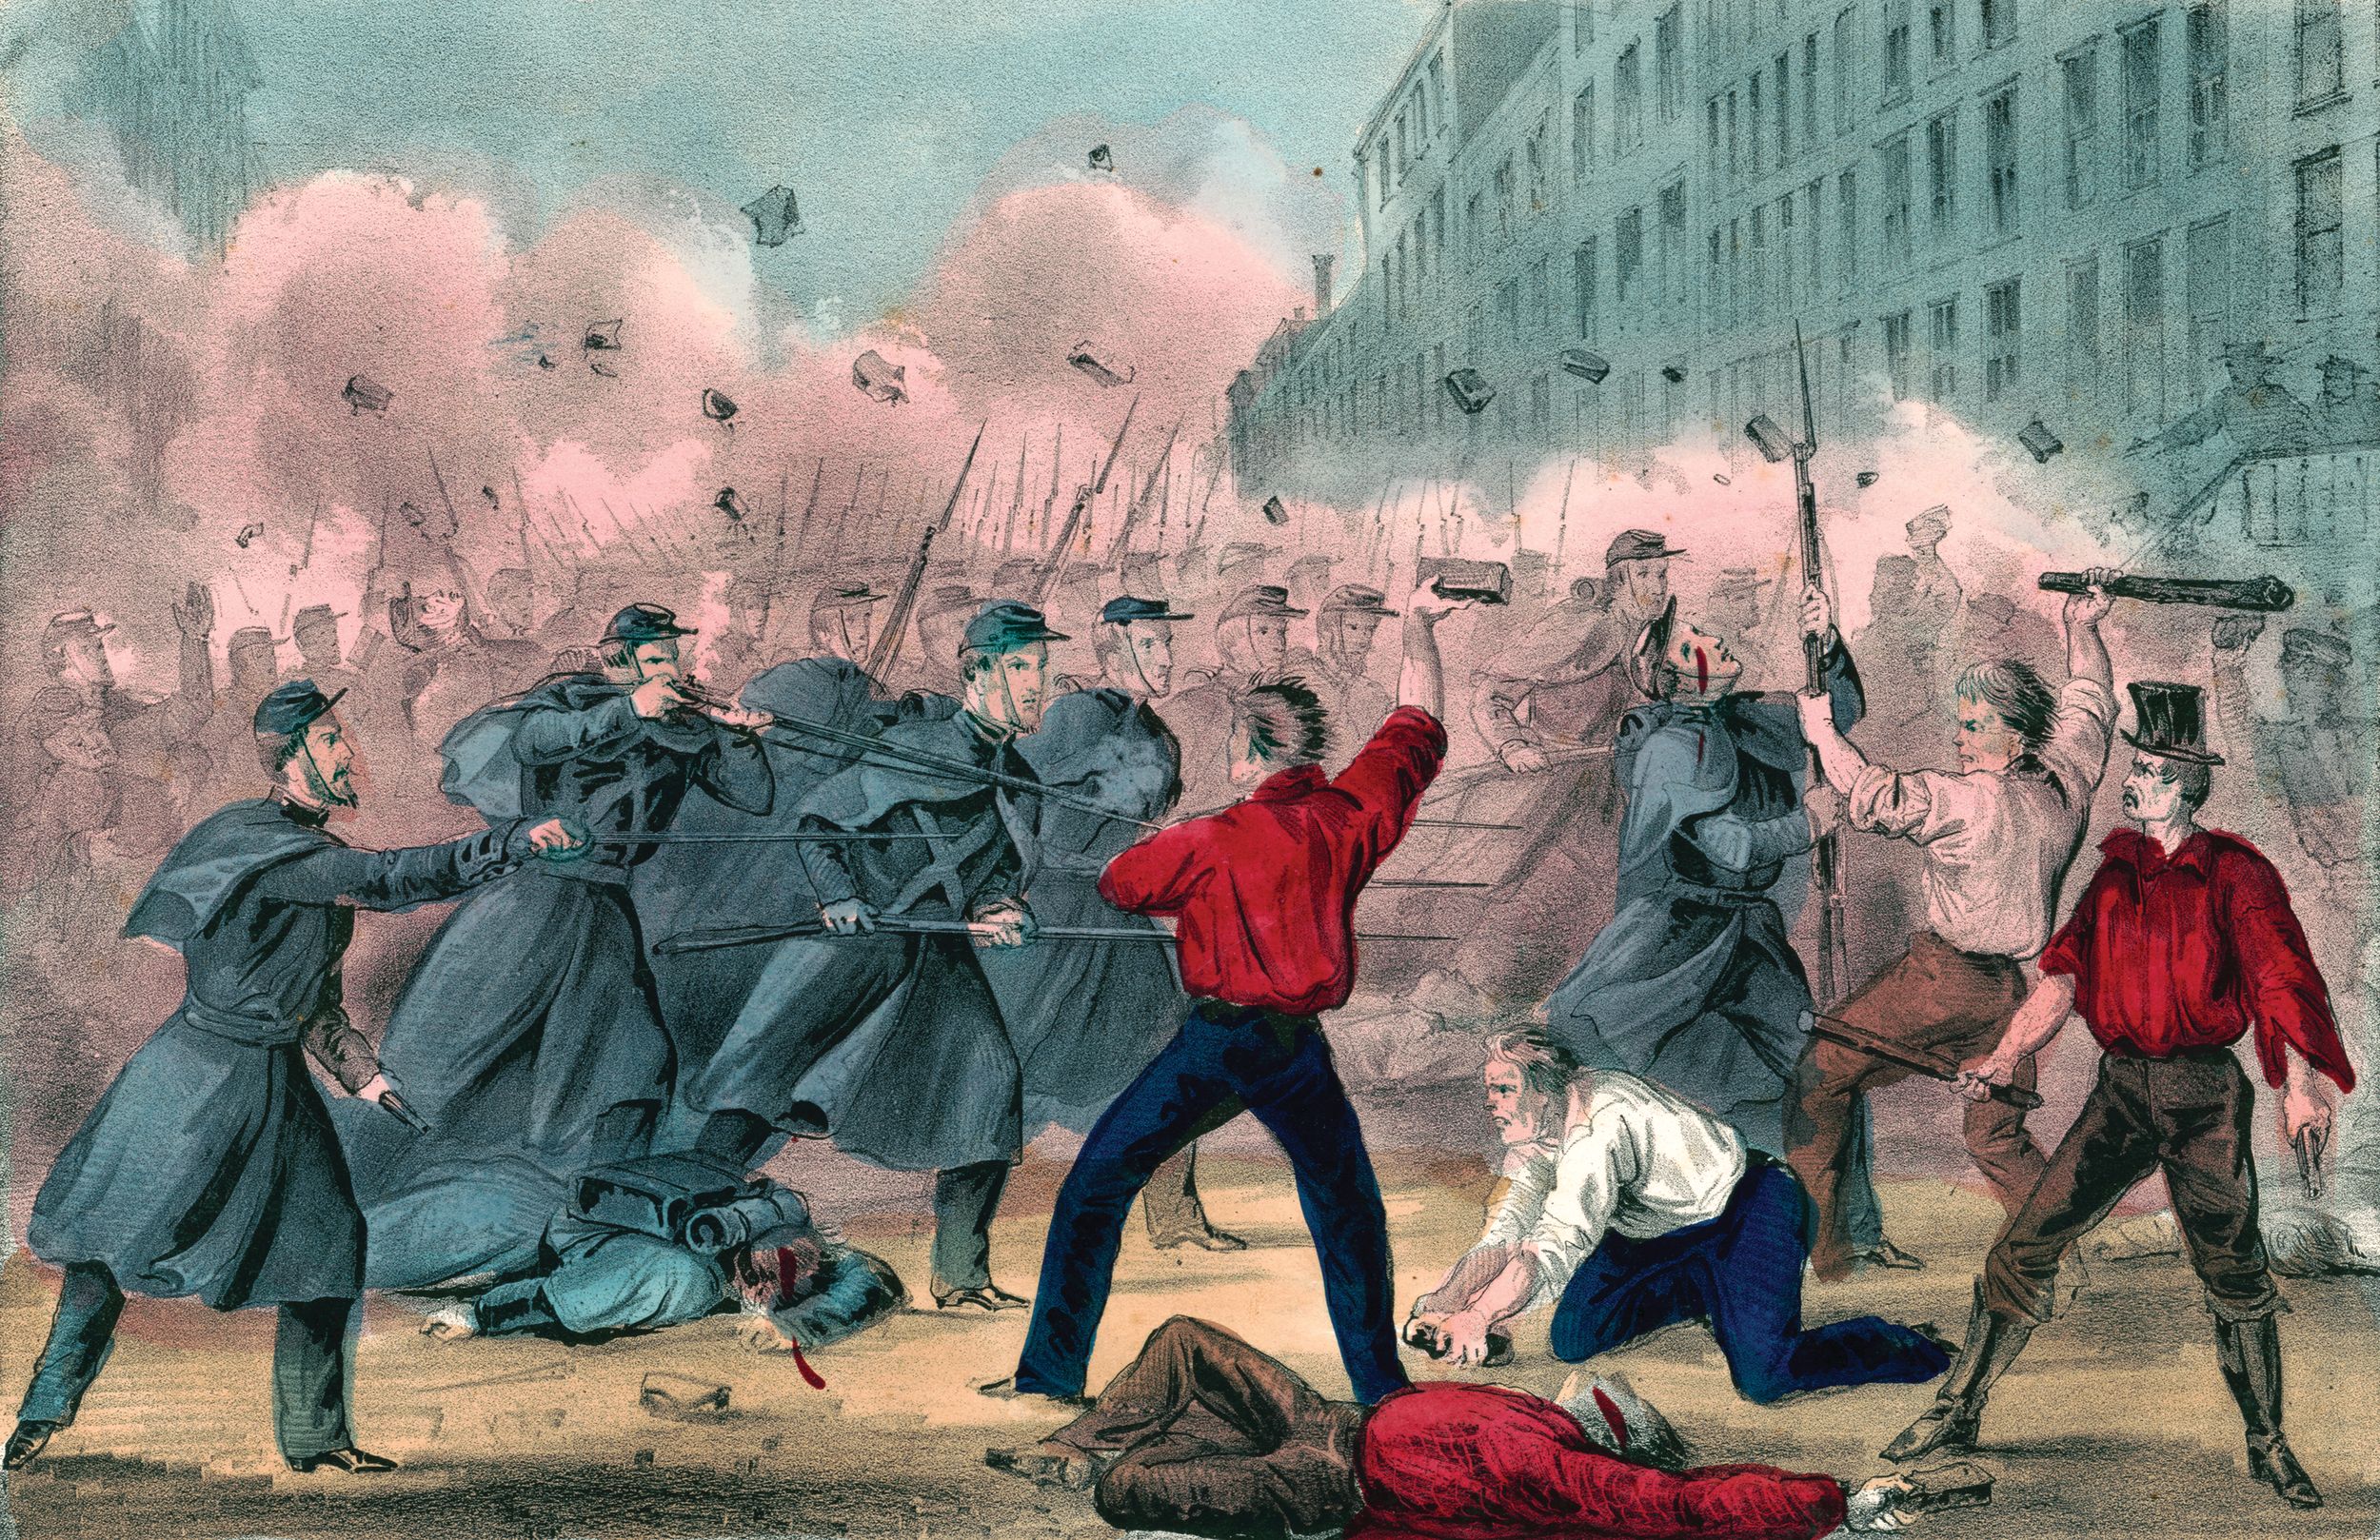 Union recruits gathering near Washington, D.C., had to march through sessionist Baltimore, where a riot broke out when the 6th Massachussets Militia marched through. Marching with fixed bayonets, the 1st Michigan was verbally harassed, but not attacked in Baltimore. 